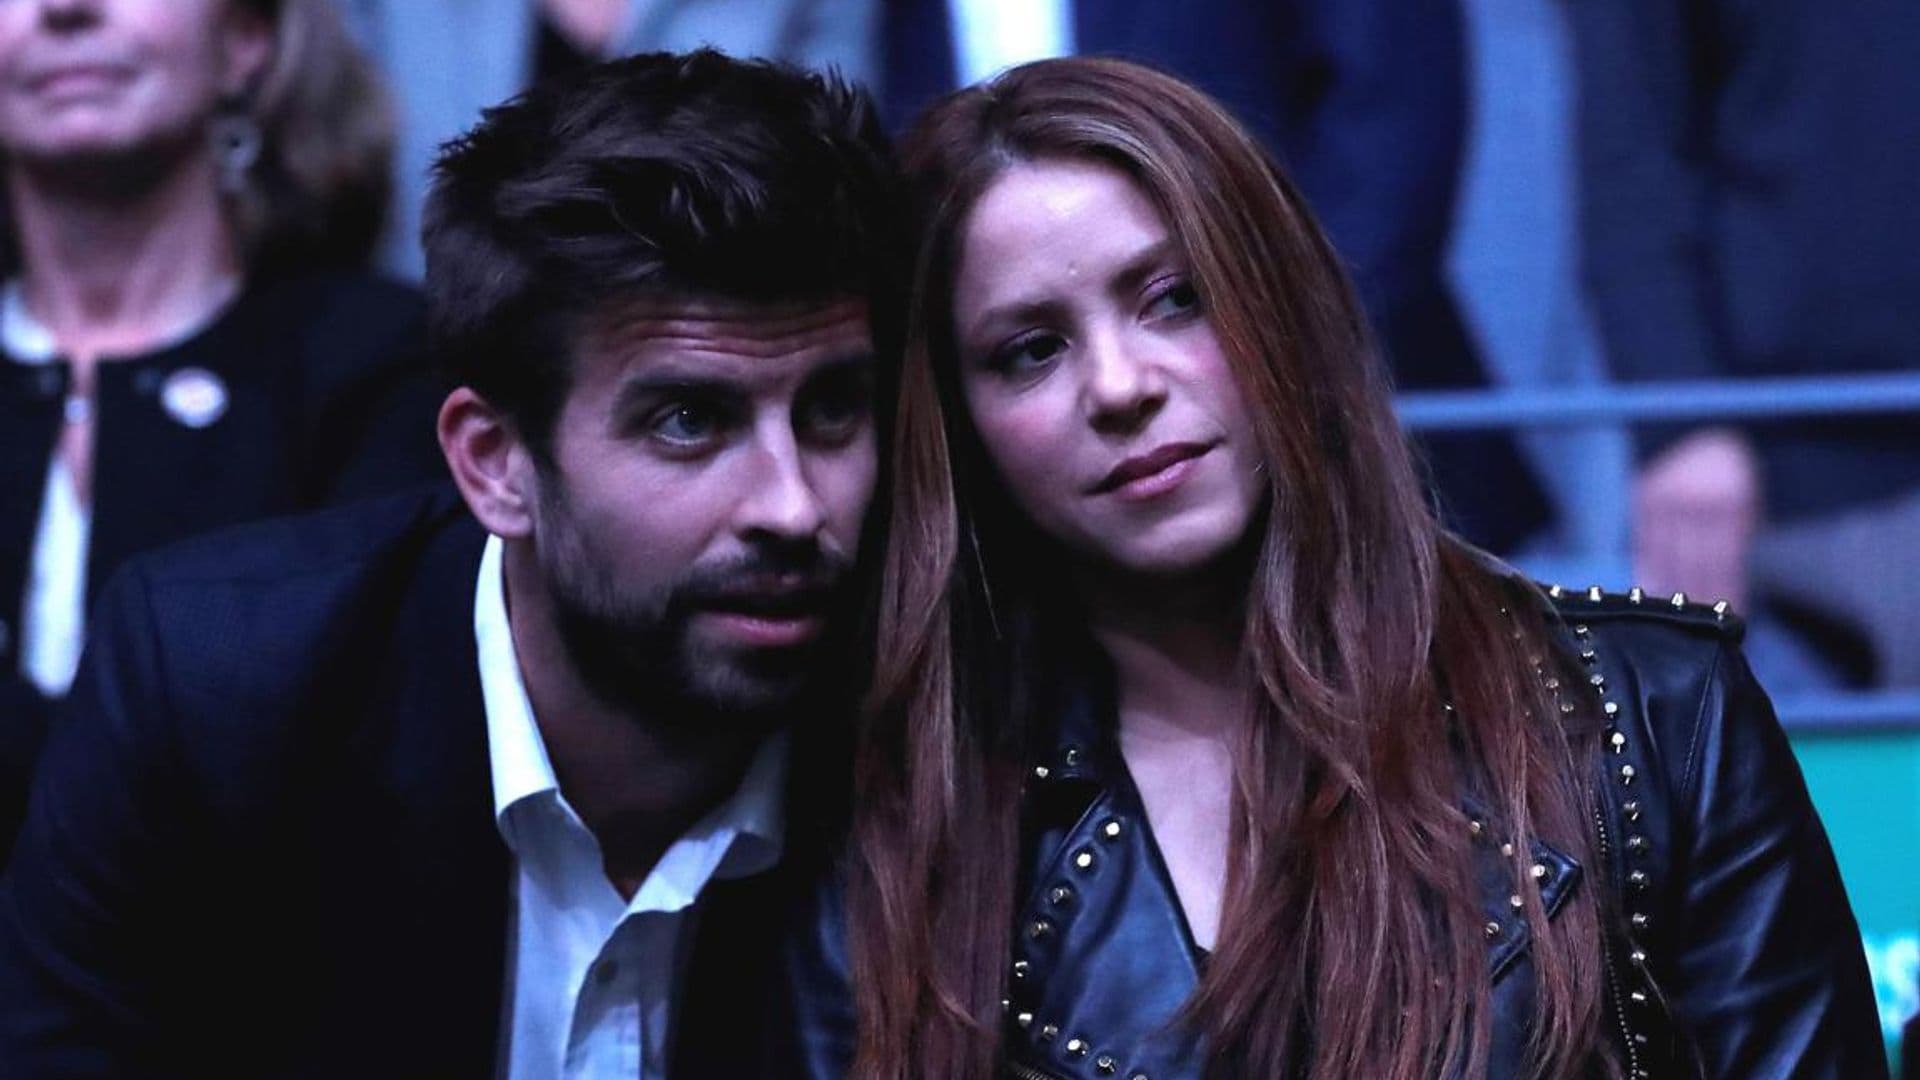 Shakira sent the most romantic message to Pique, who missed her performance at the Super Bowl